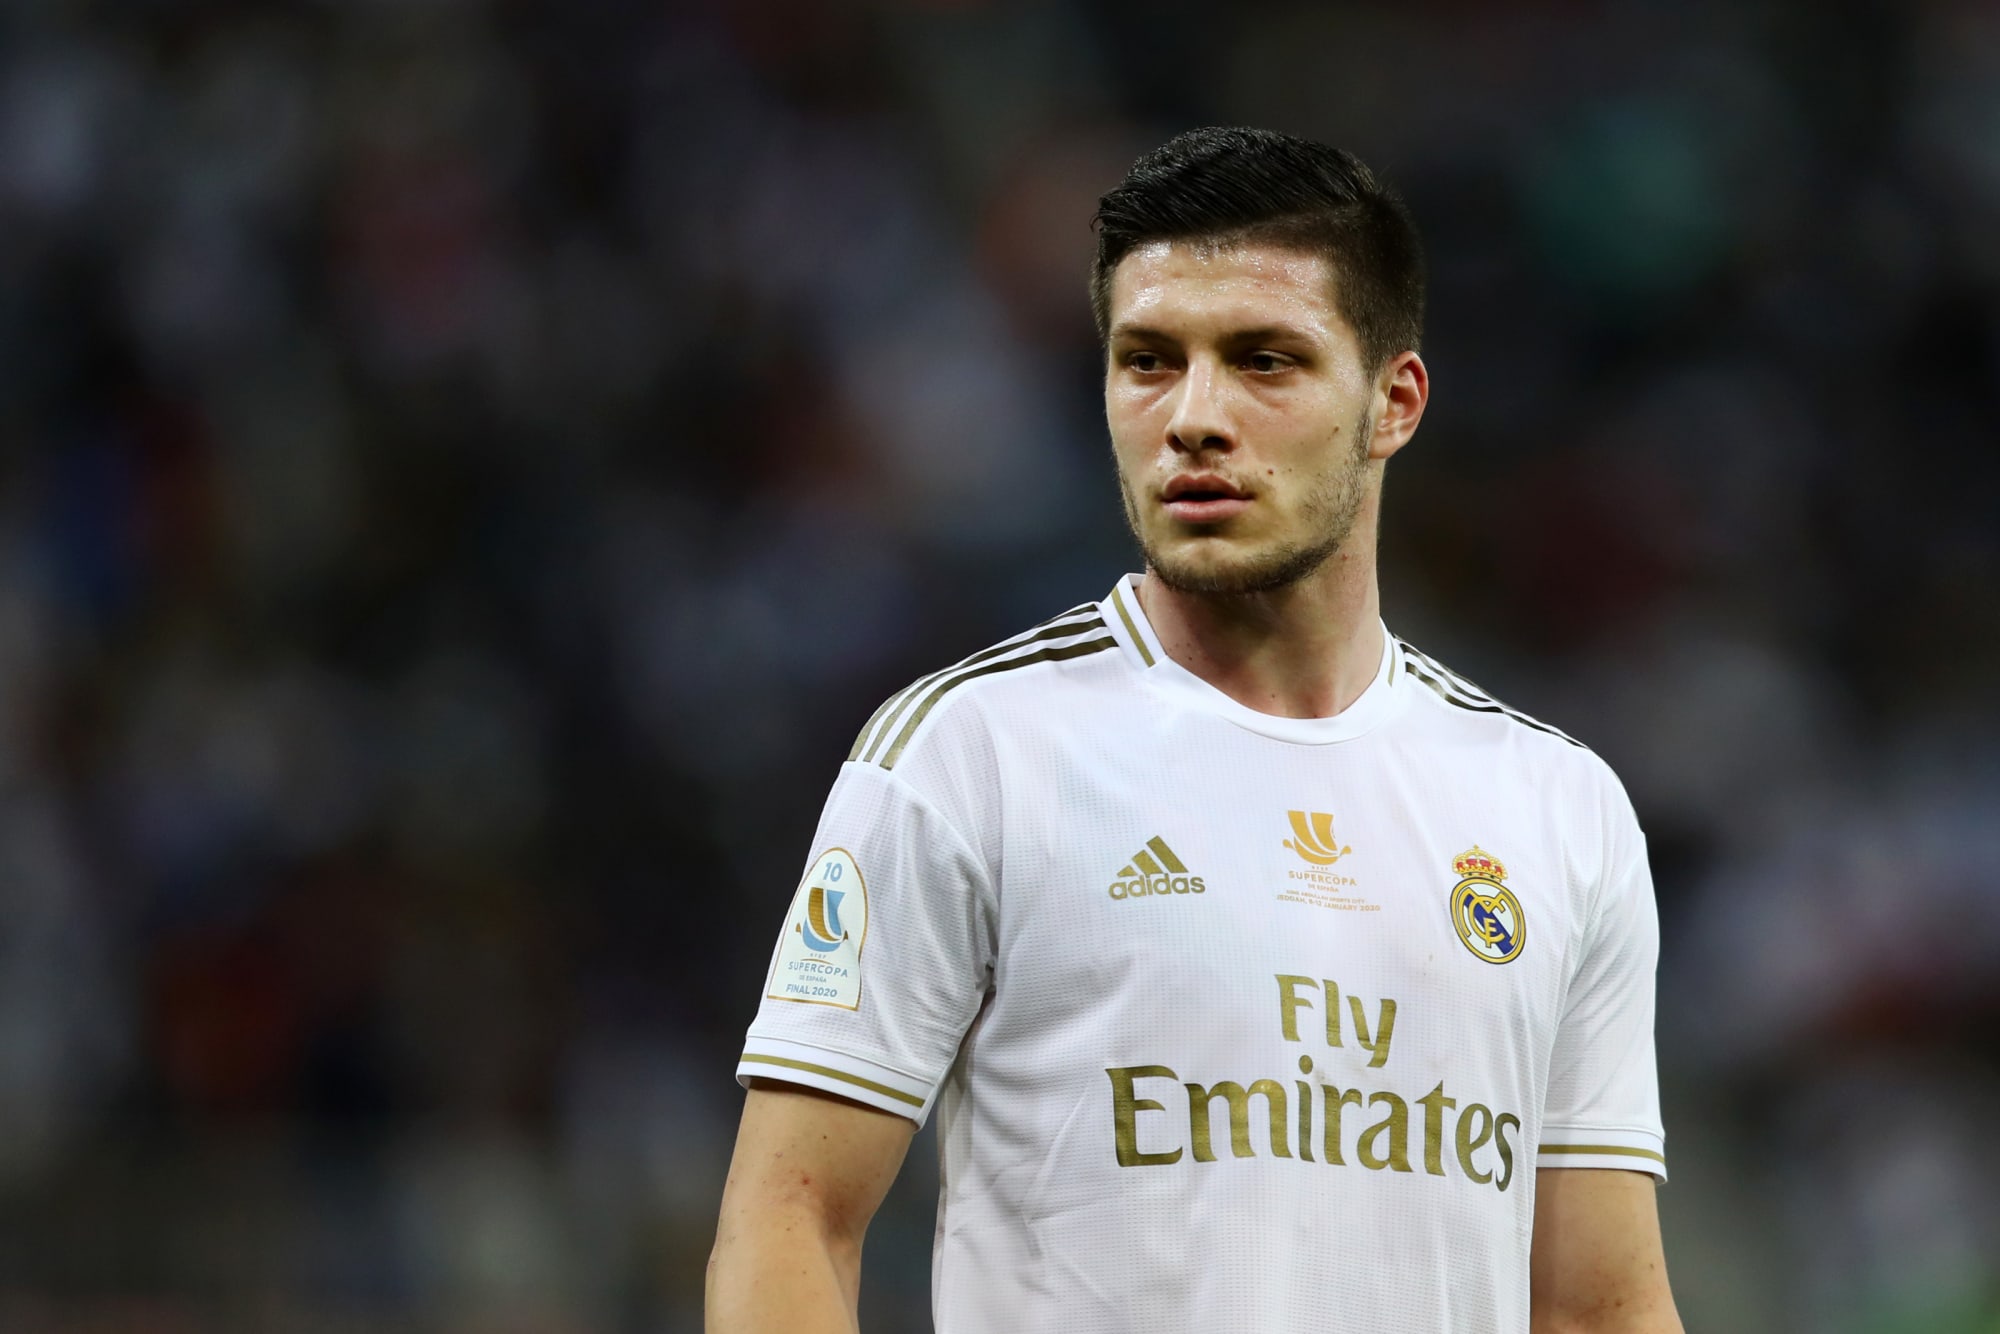 Real Madrid striker has suffered a fractured right foot